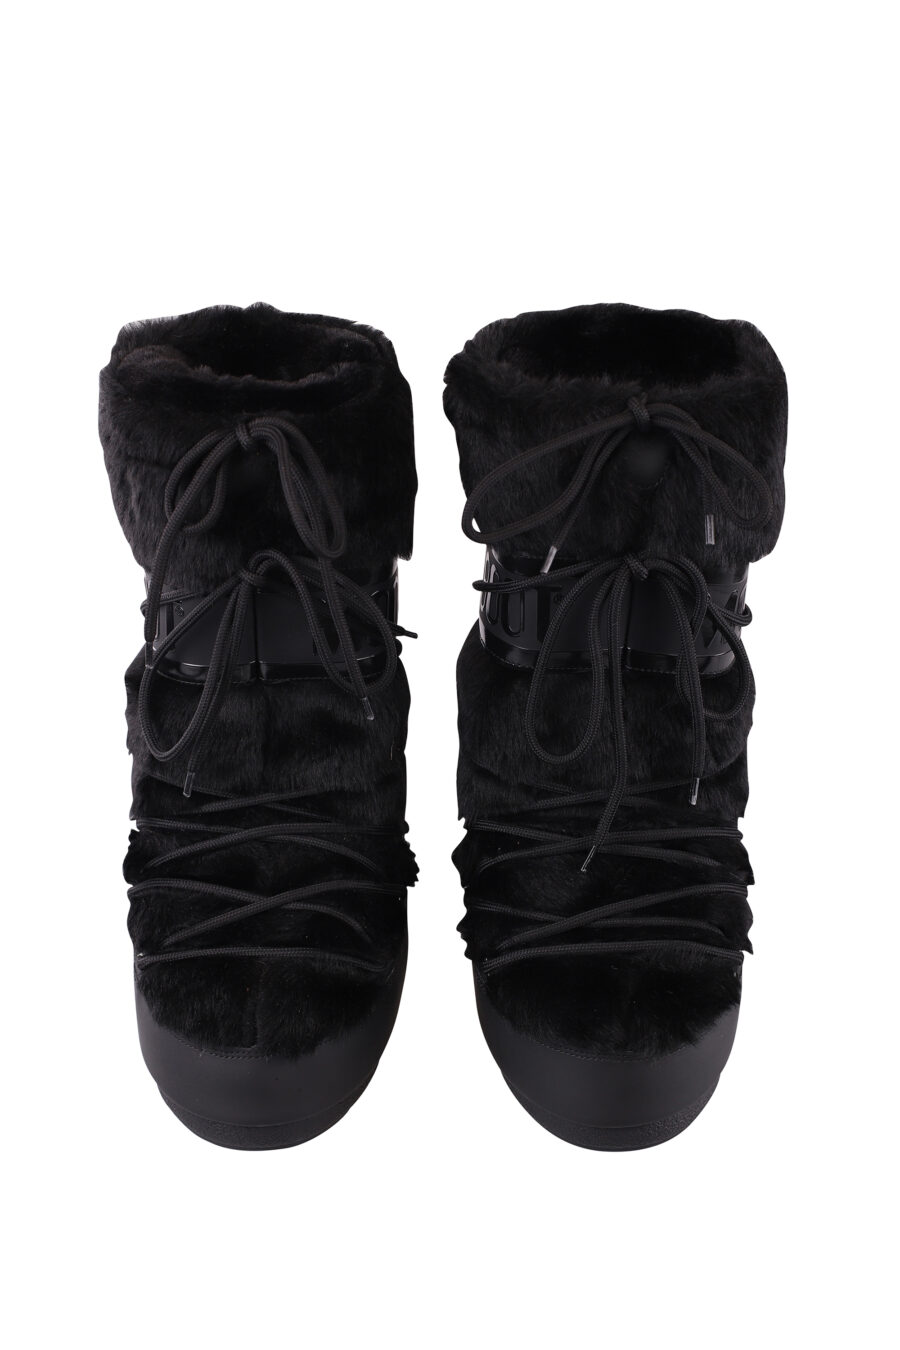 Black snow boots with monochrome logo - IMG 6675